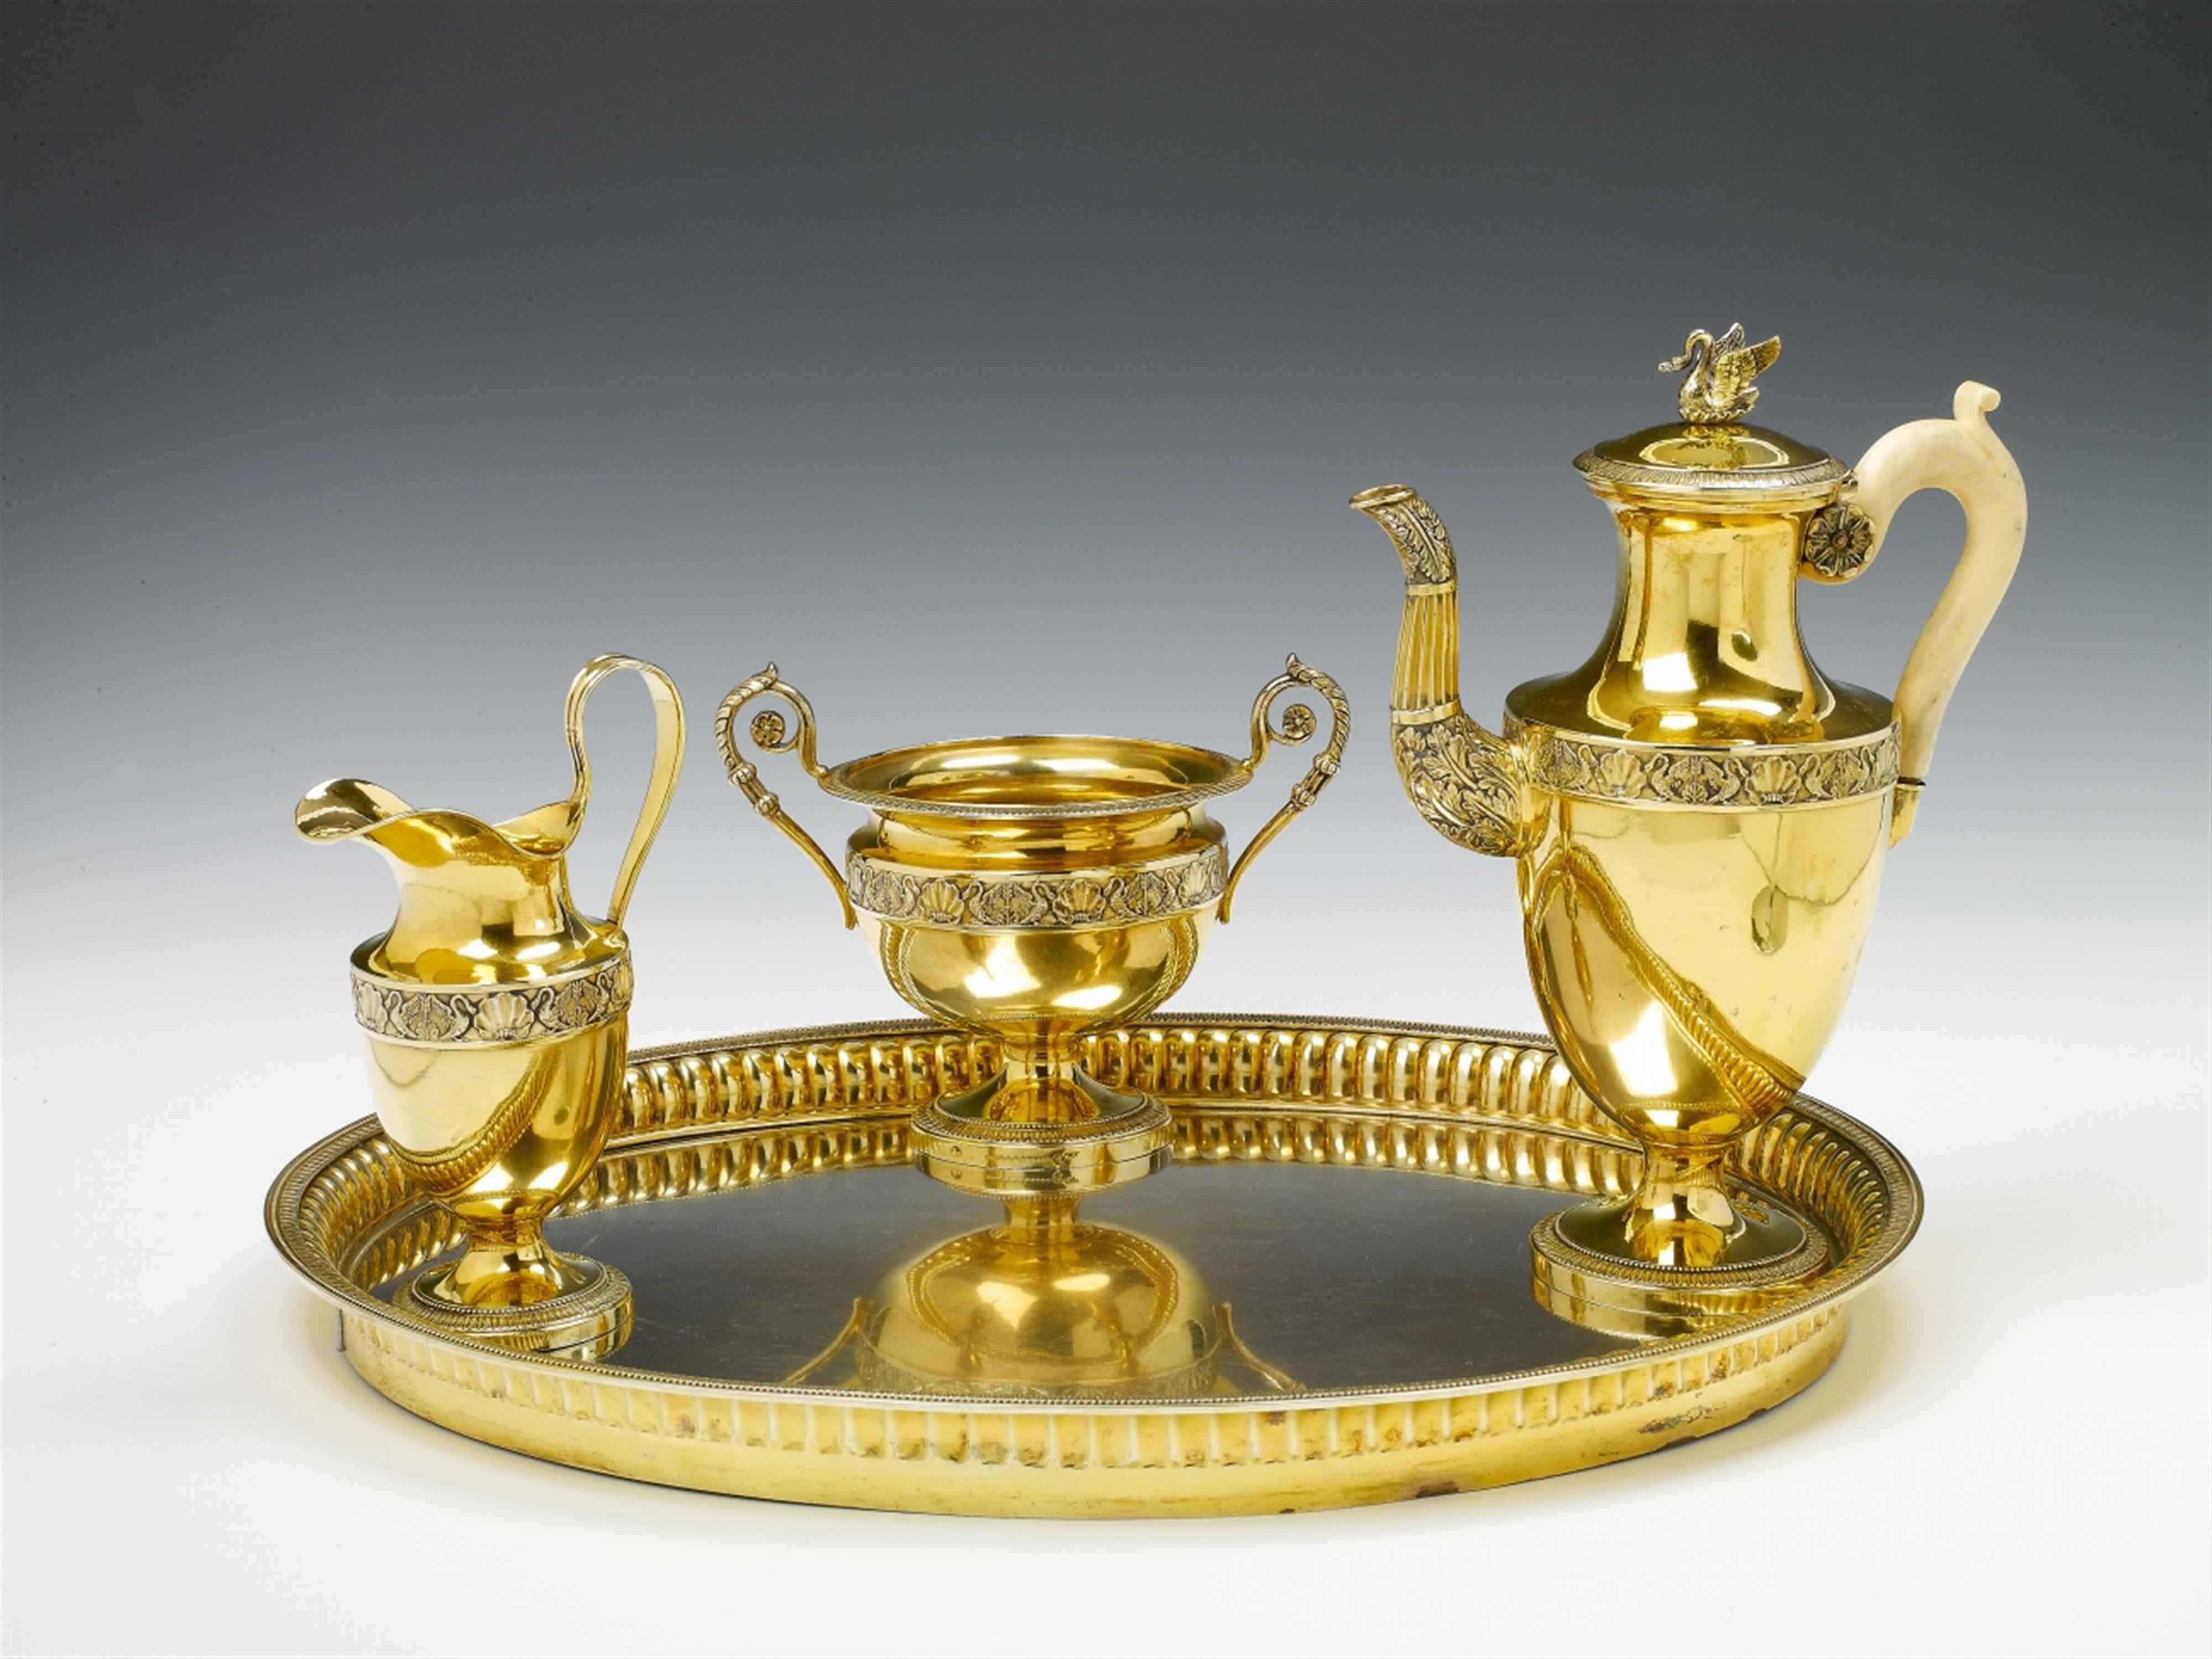 A Berlin partially gilt silver Neoclassical coffee service. Comprising a coffee pot, milk jug, sugar bowl and large platter. With ivory handles. Marks of Johann George Humbert and Gottlob Ludwig Howaldt, ca. 1820. - image-1